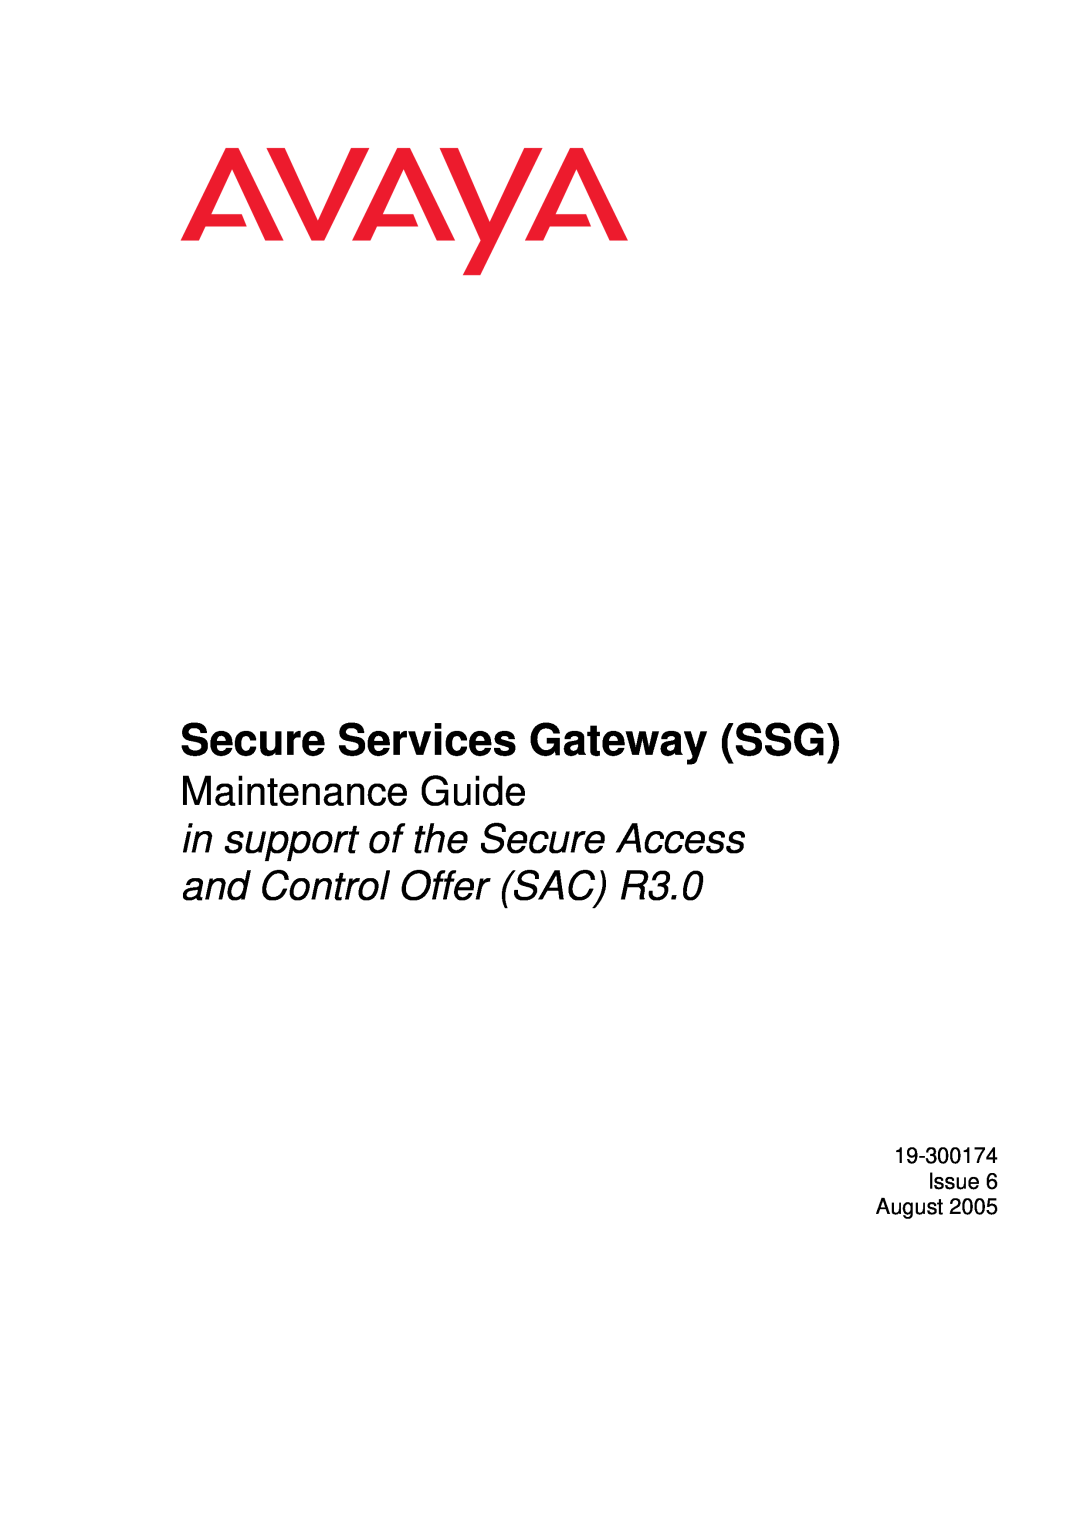 Avaya R3.0 manual Secure Services Gateway SSG, Maintenance Guide, Issue 6 August 